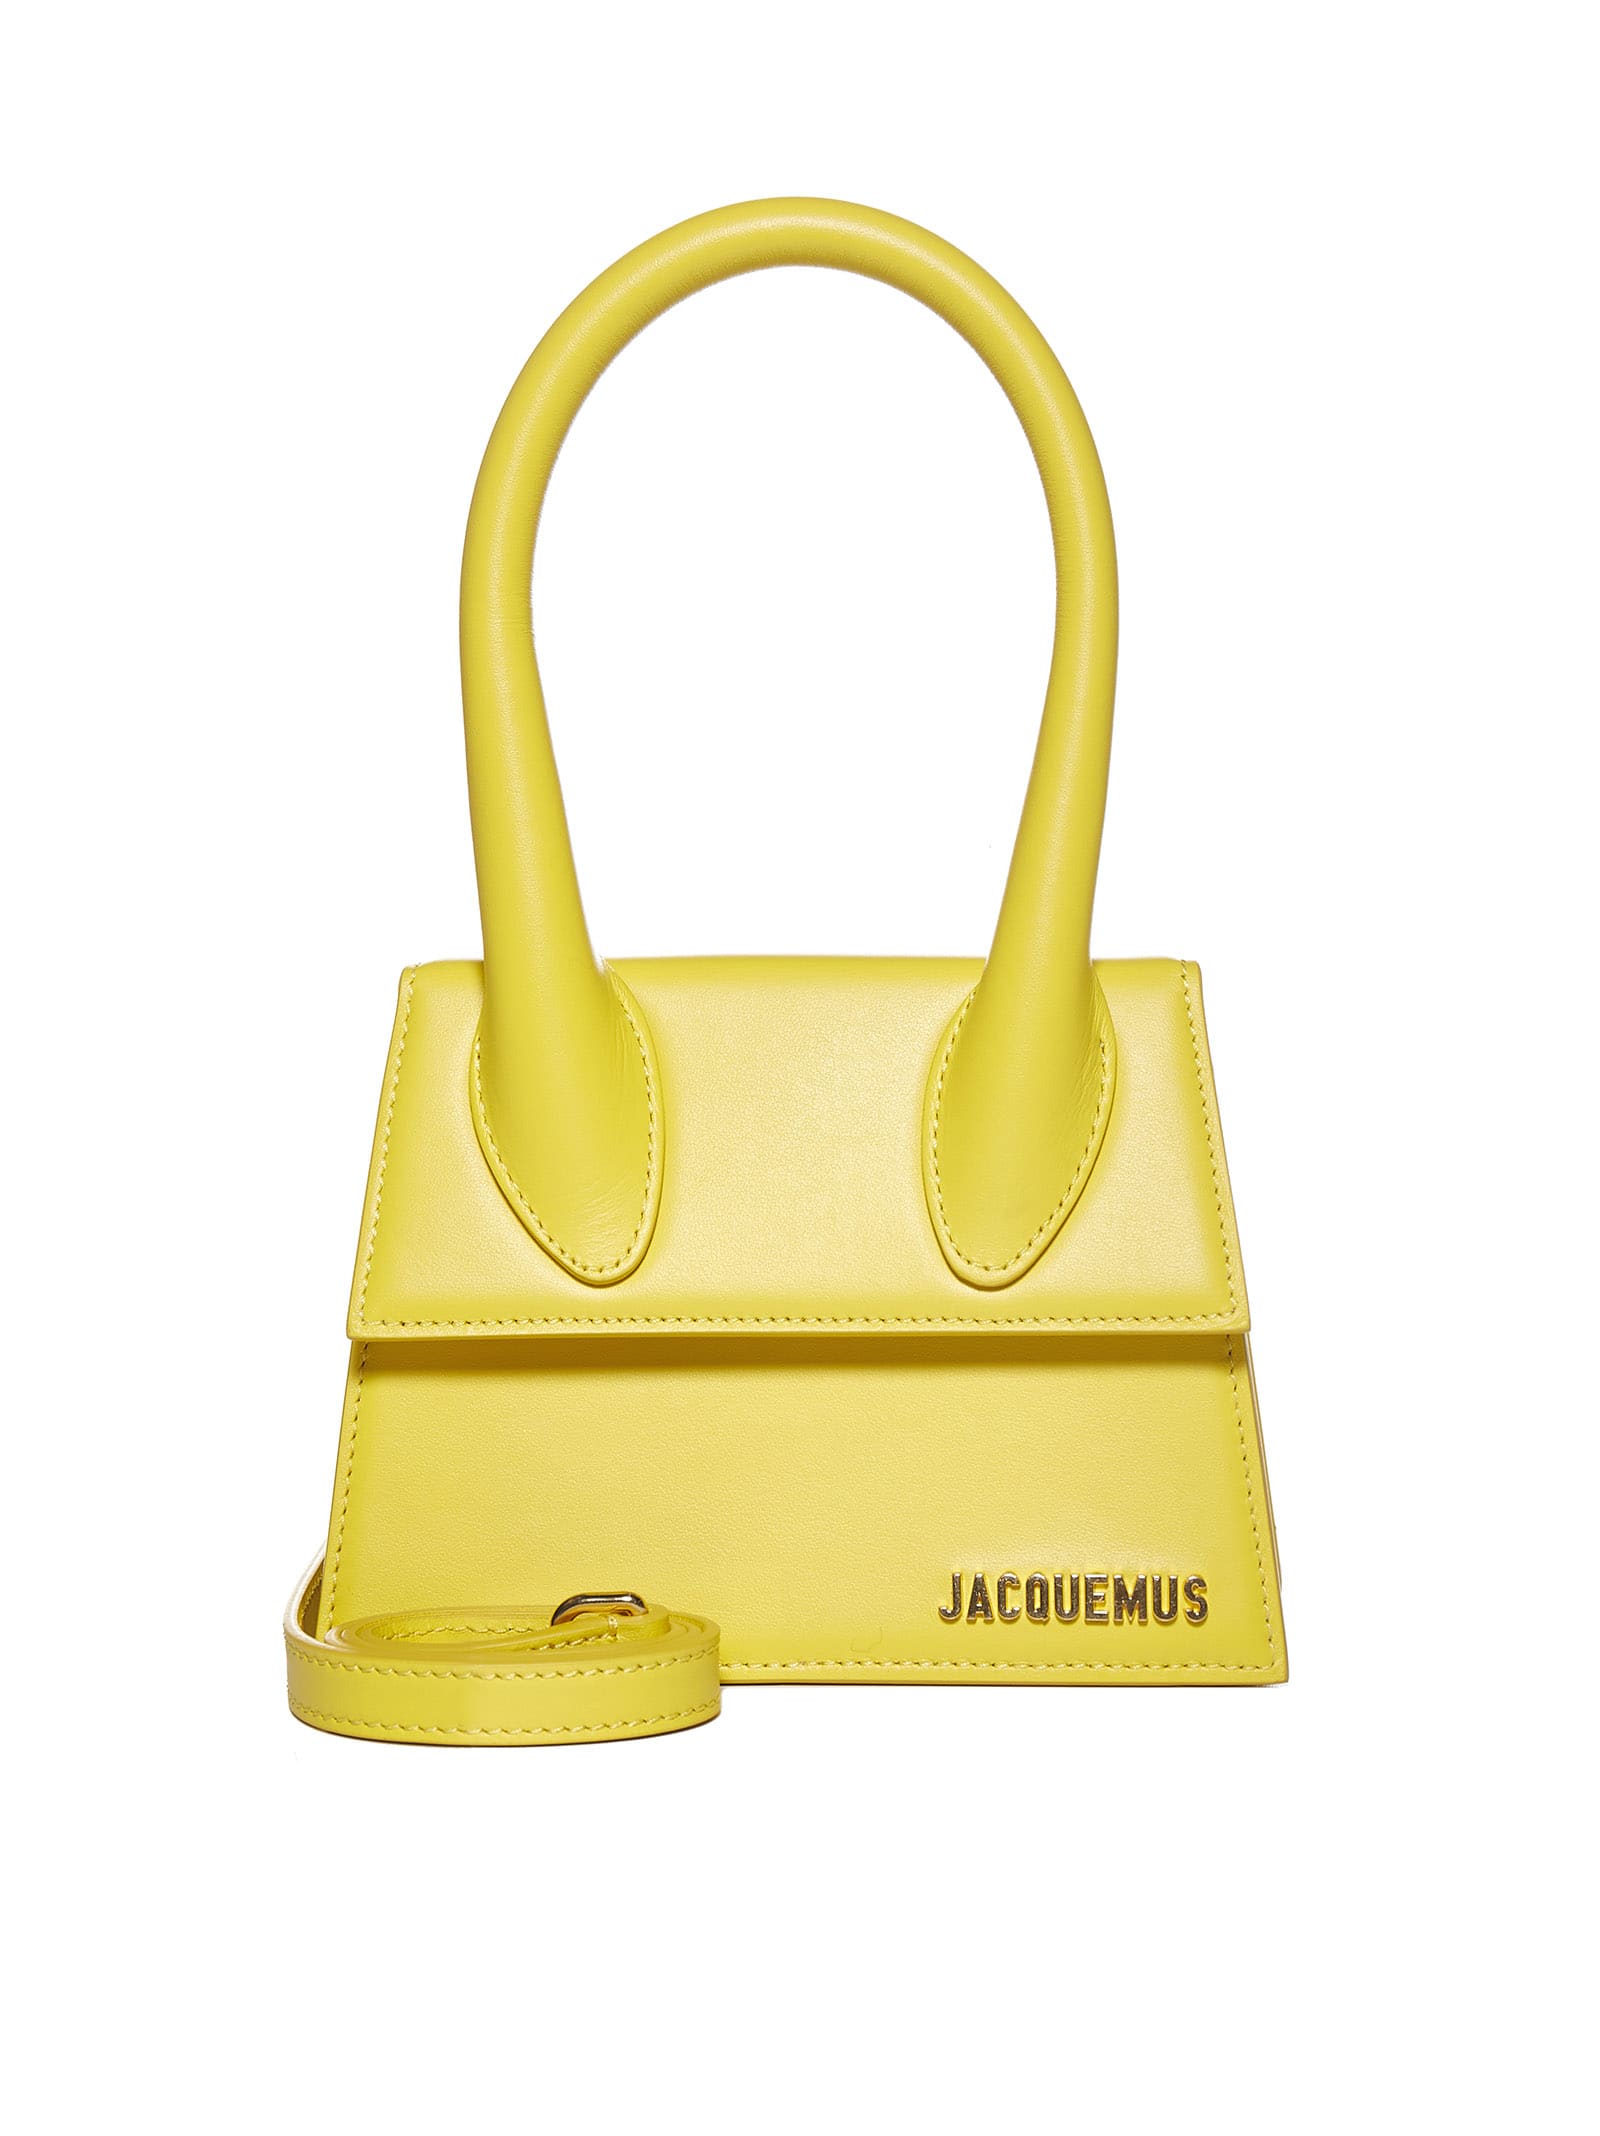 Jacquemus Tote In Yellow | ModeSens